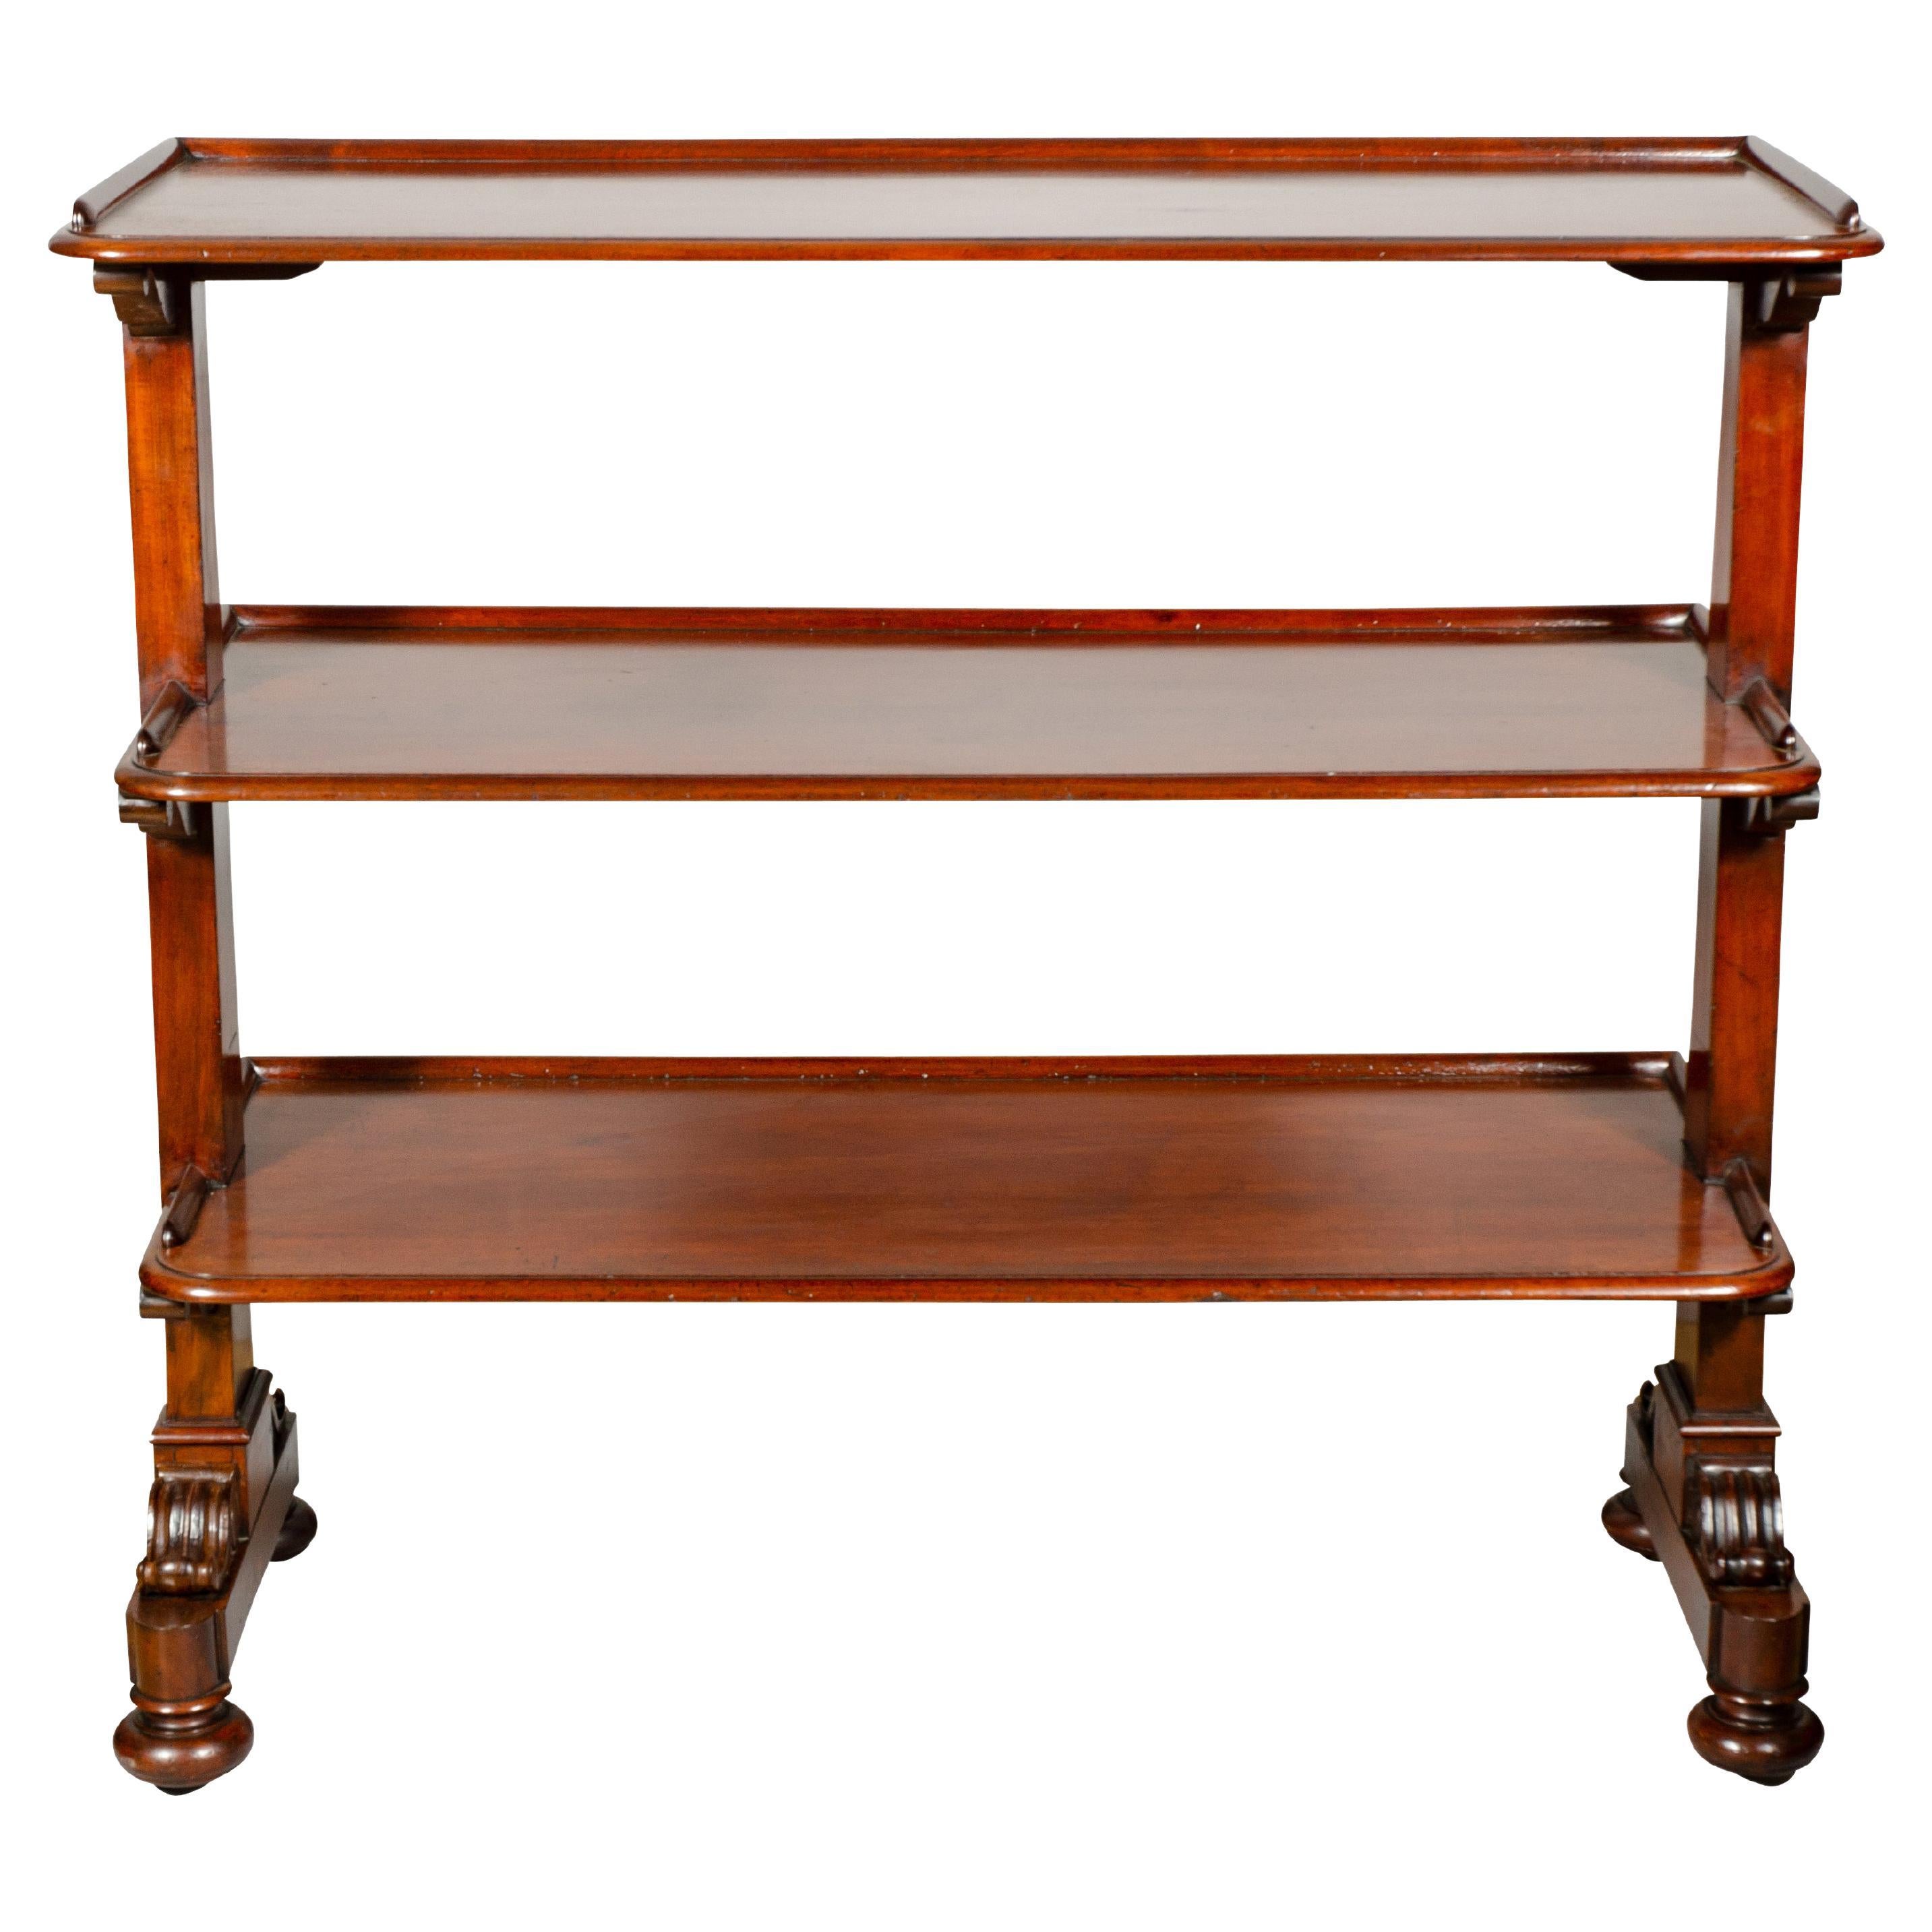 Most likely by Gillows of Lancaster. Excellent timber. Three shelves each with molded edges and carved volute brackets and panelled ends, raised on flattened ball feet with casters. These were used in dining rooms as a trolley for silver and dinner